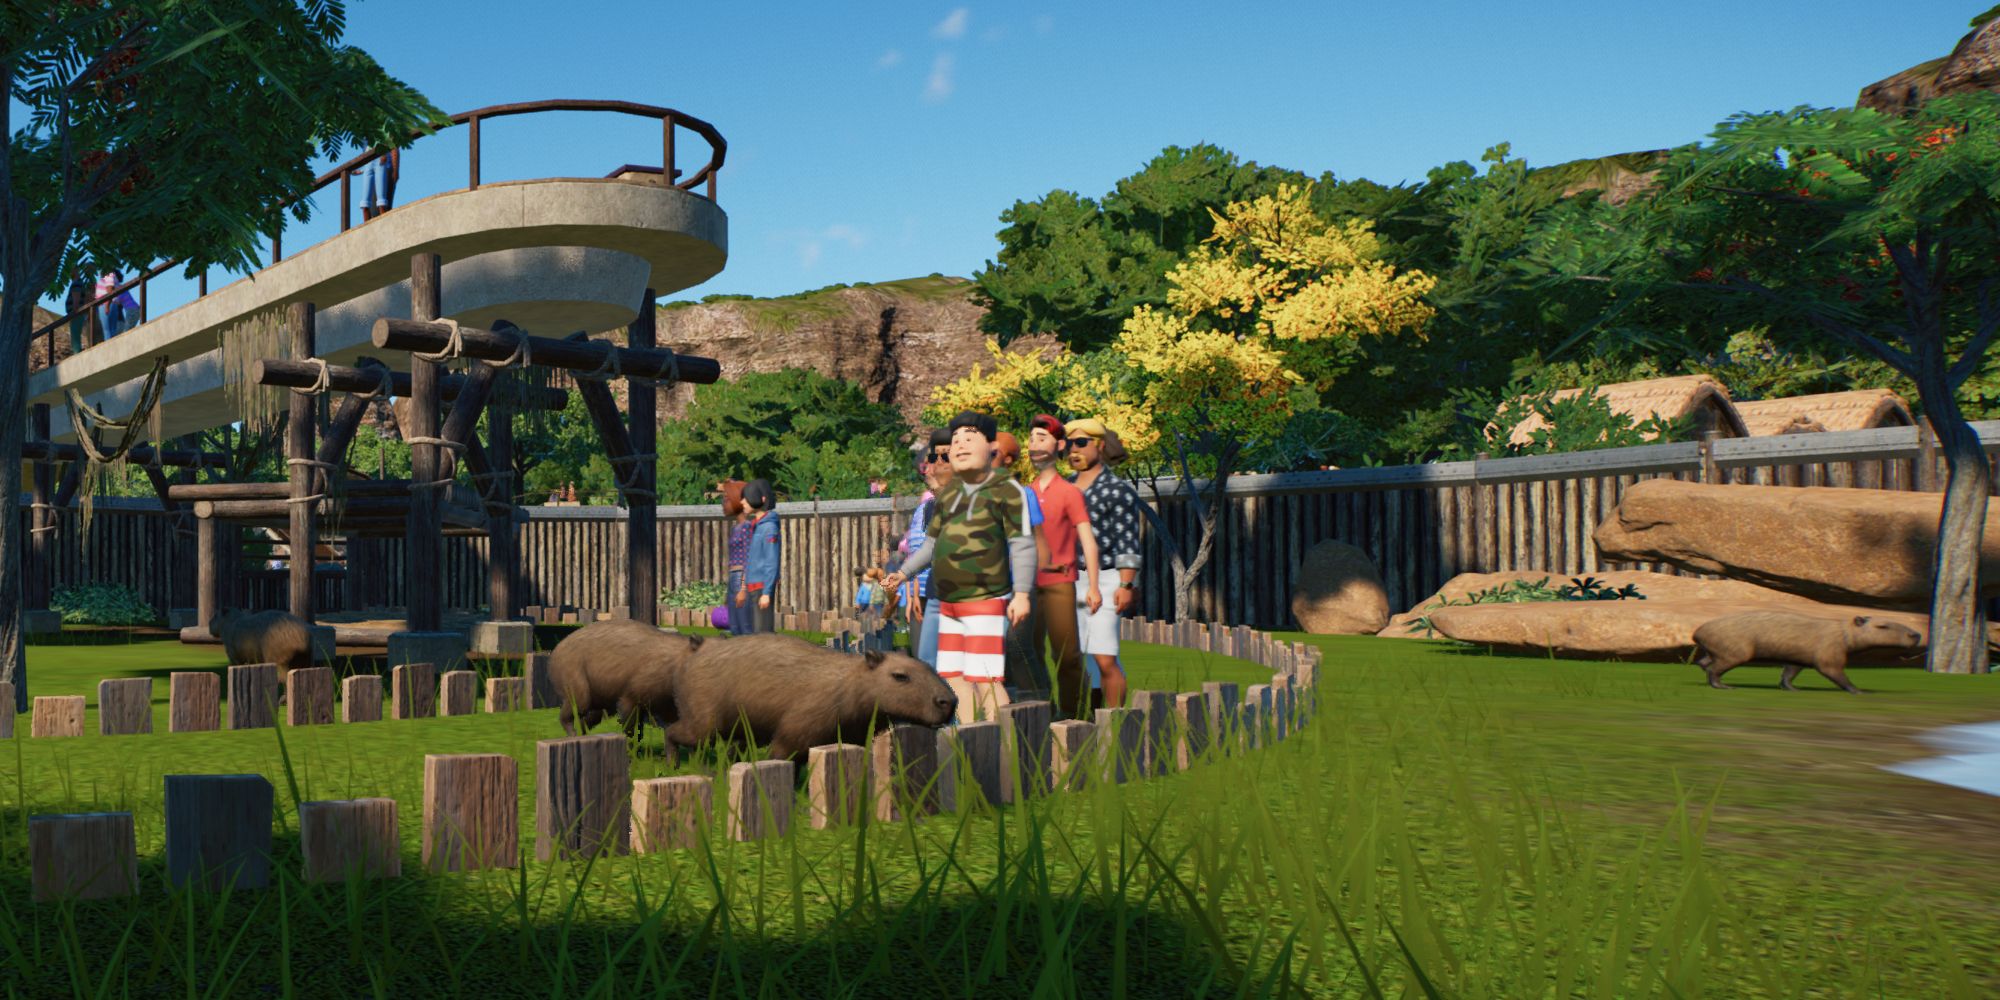 Planet Zoo Wetlands capybaras with guests